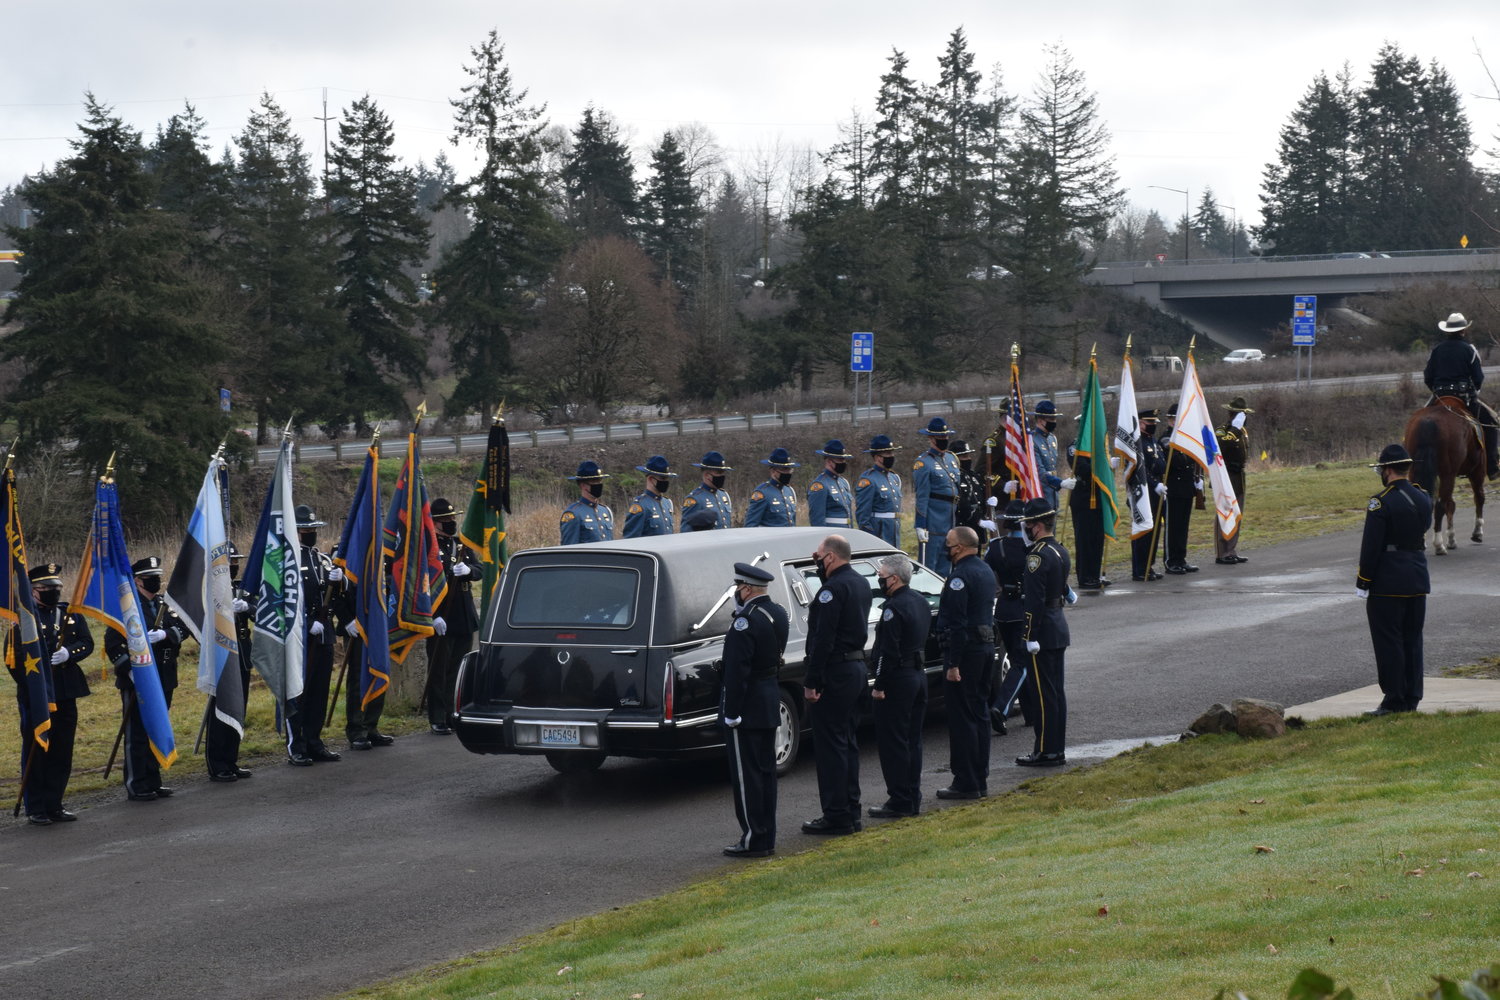 The hearse carrying Vancouver Police Officer Donald Sahota arrives at ilani for a memorial ceremony on Feb. 8.